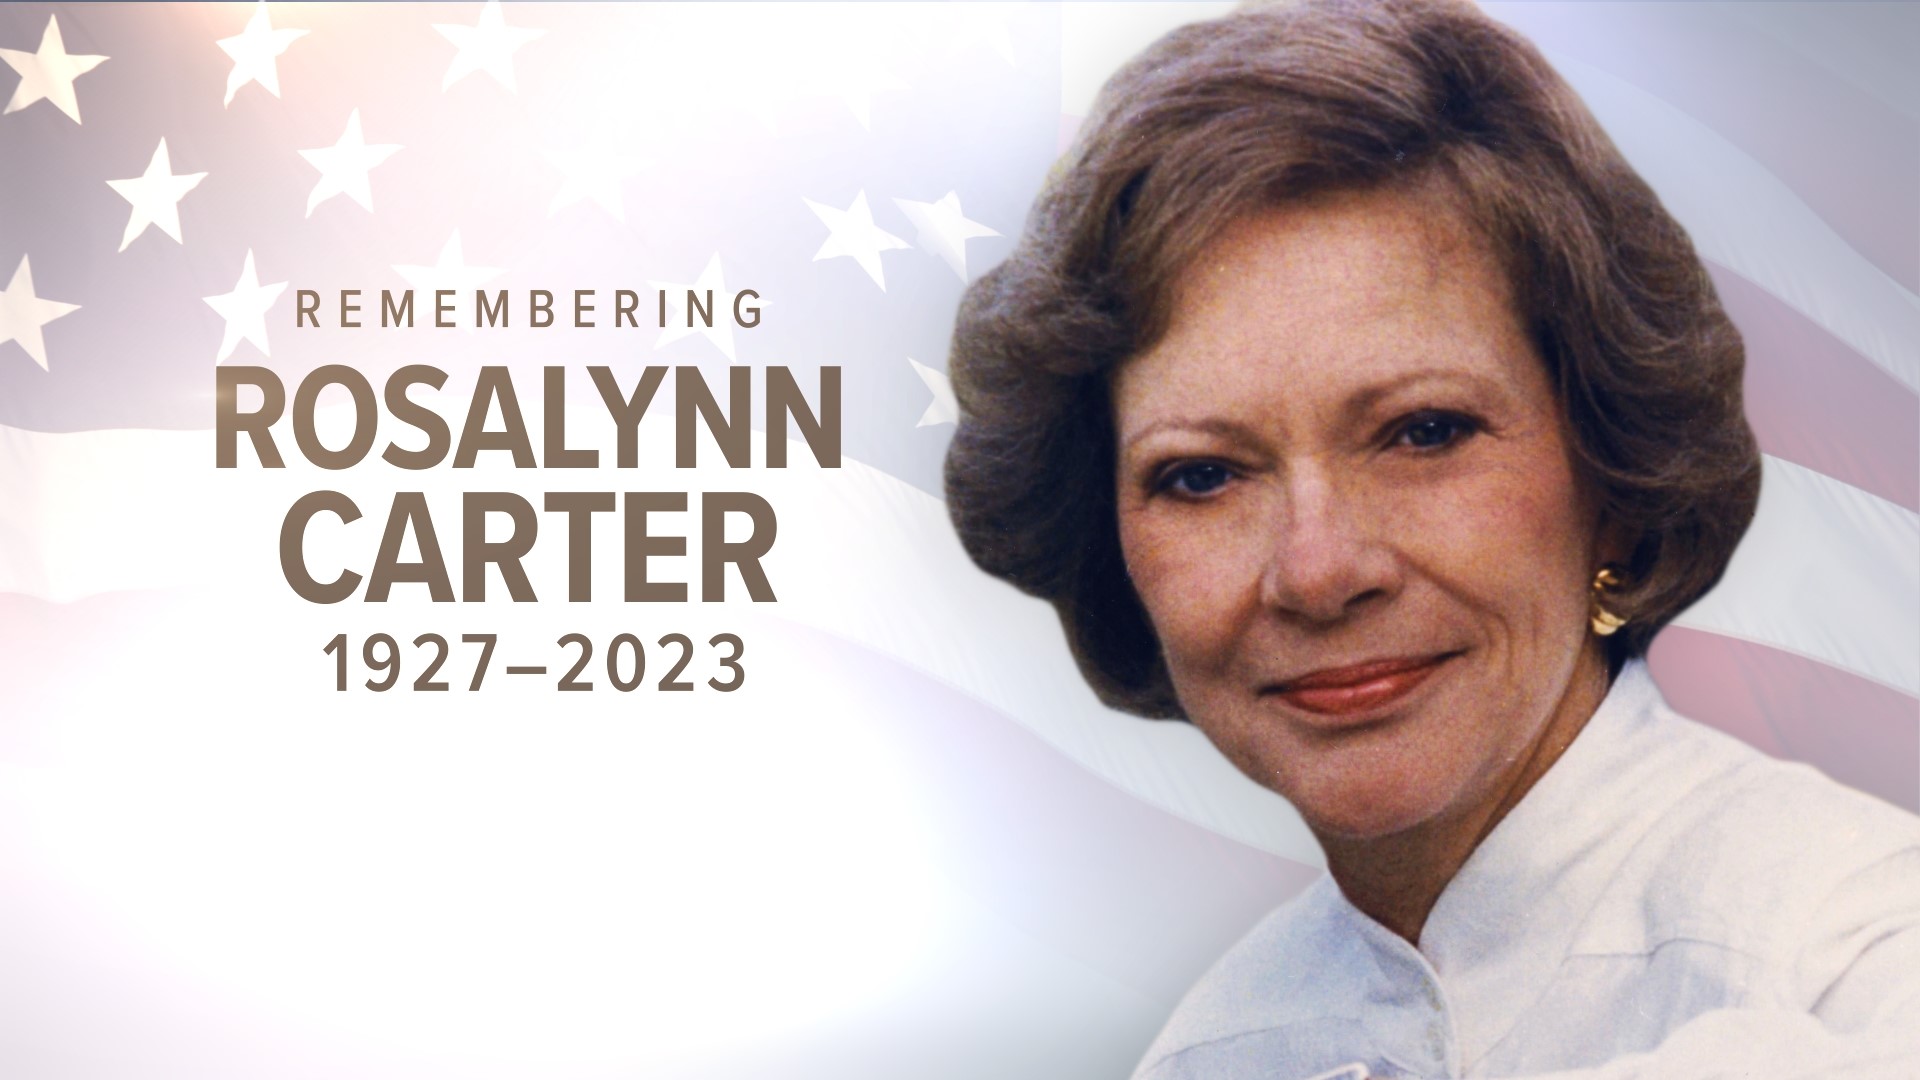 Former first lady, humanitarian and mental health advocate Rosalynn Carter died at the age of 96. A look at her legacy and her love story with Jimmy Carter.